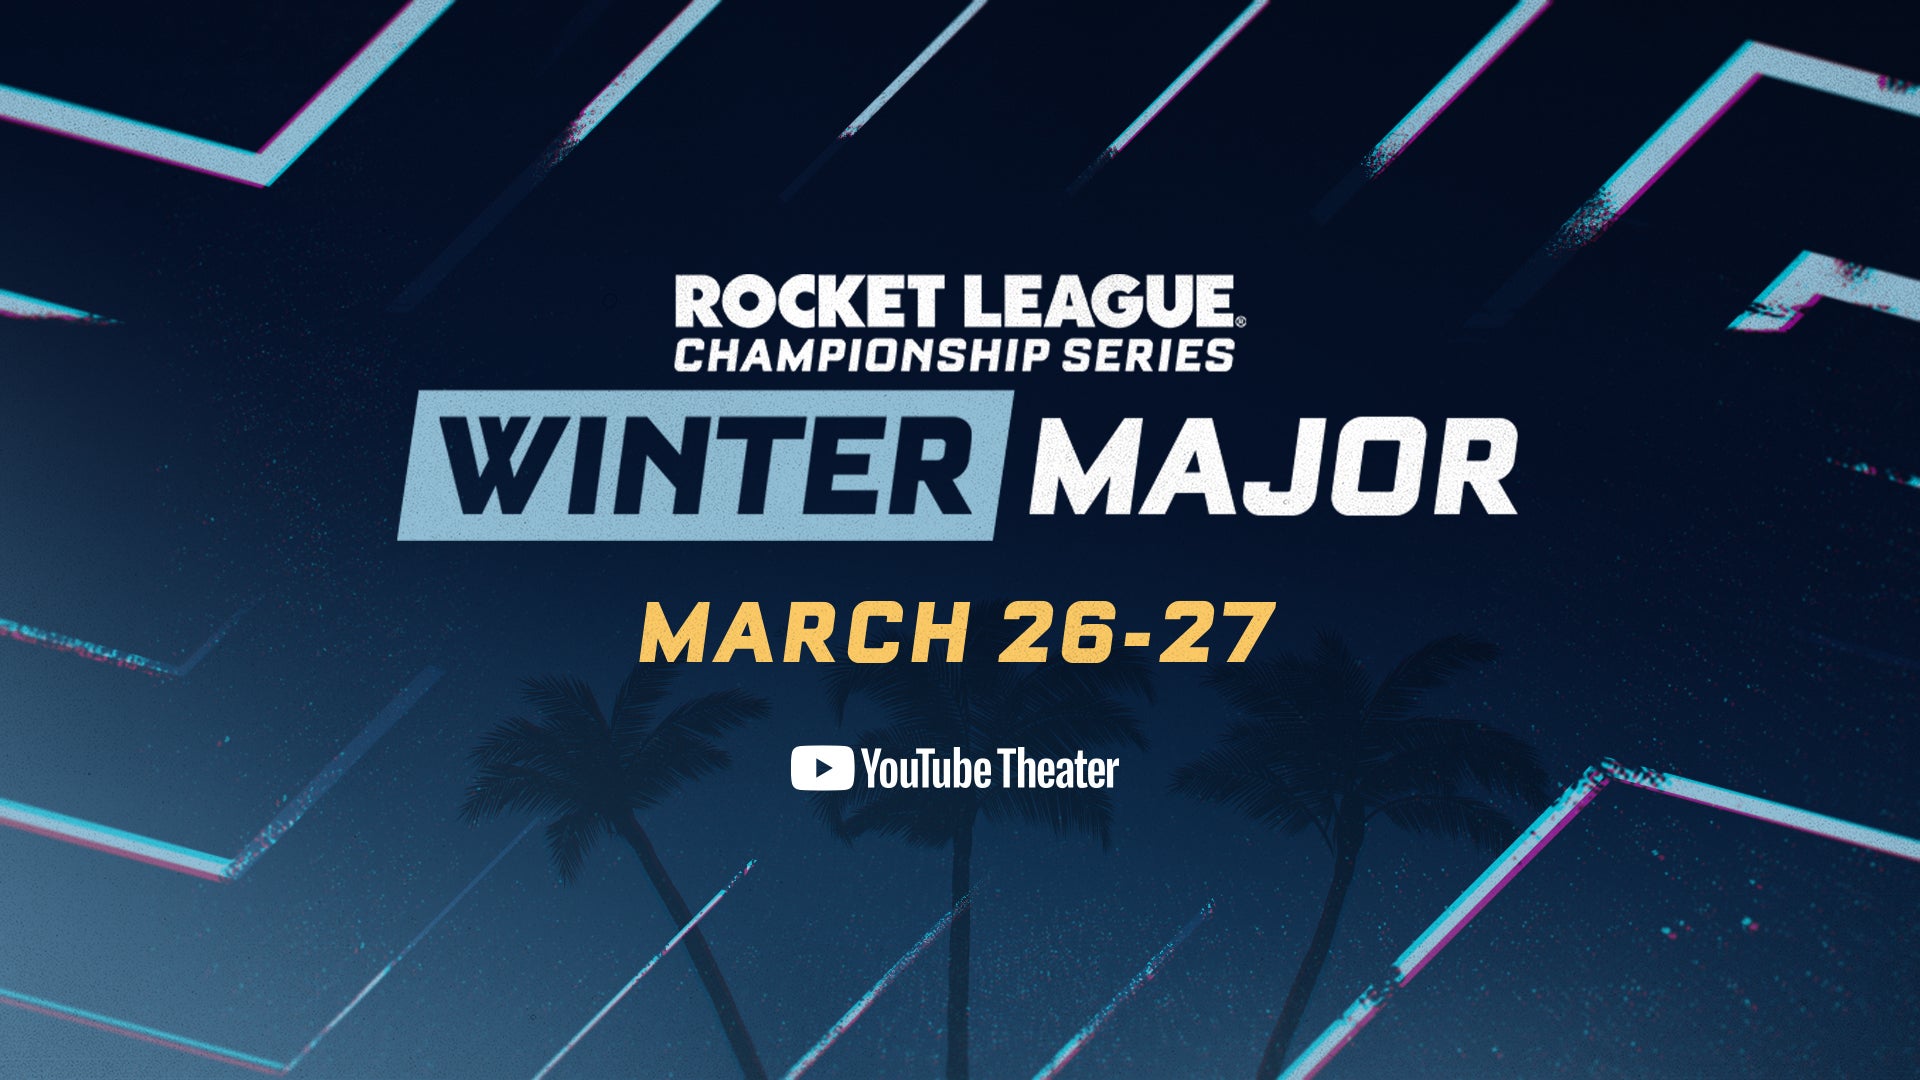 Announcing the RLCS Winter Major at the YouTube Theater!